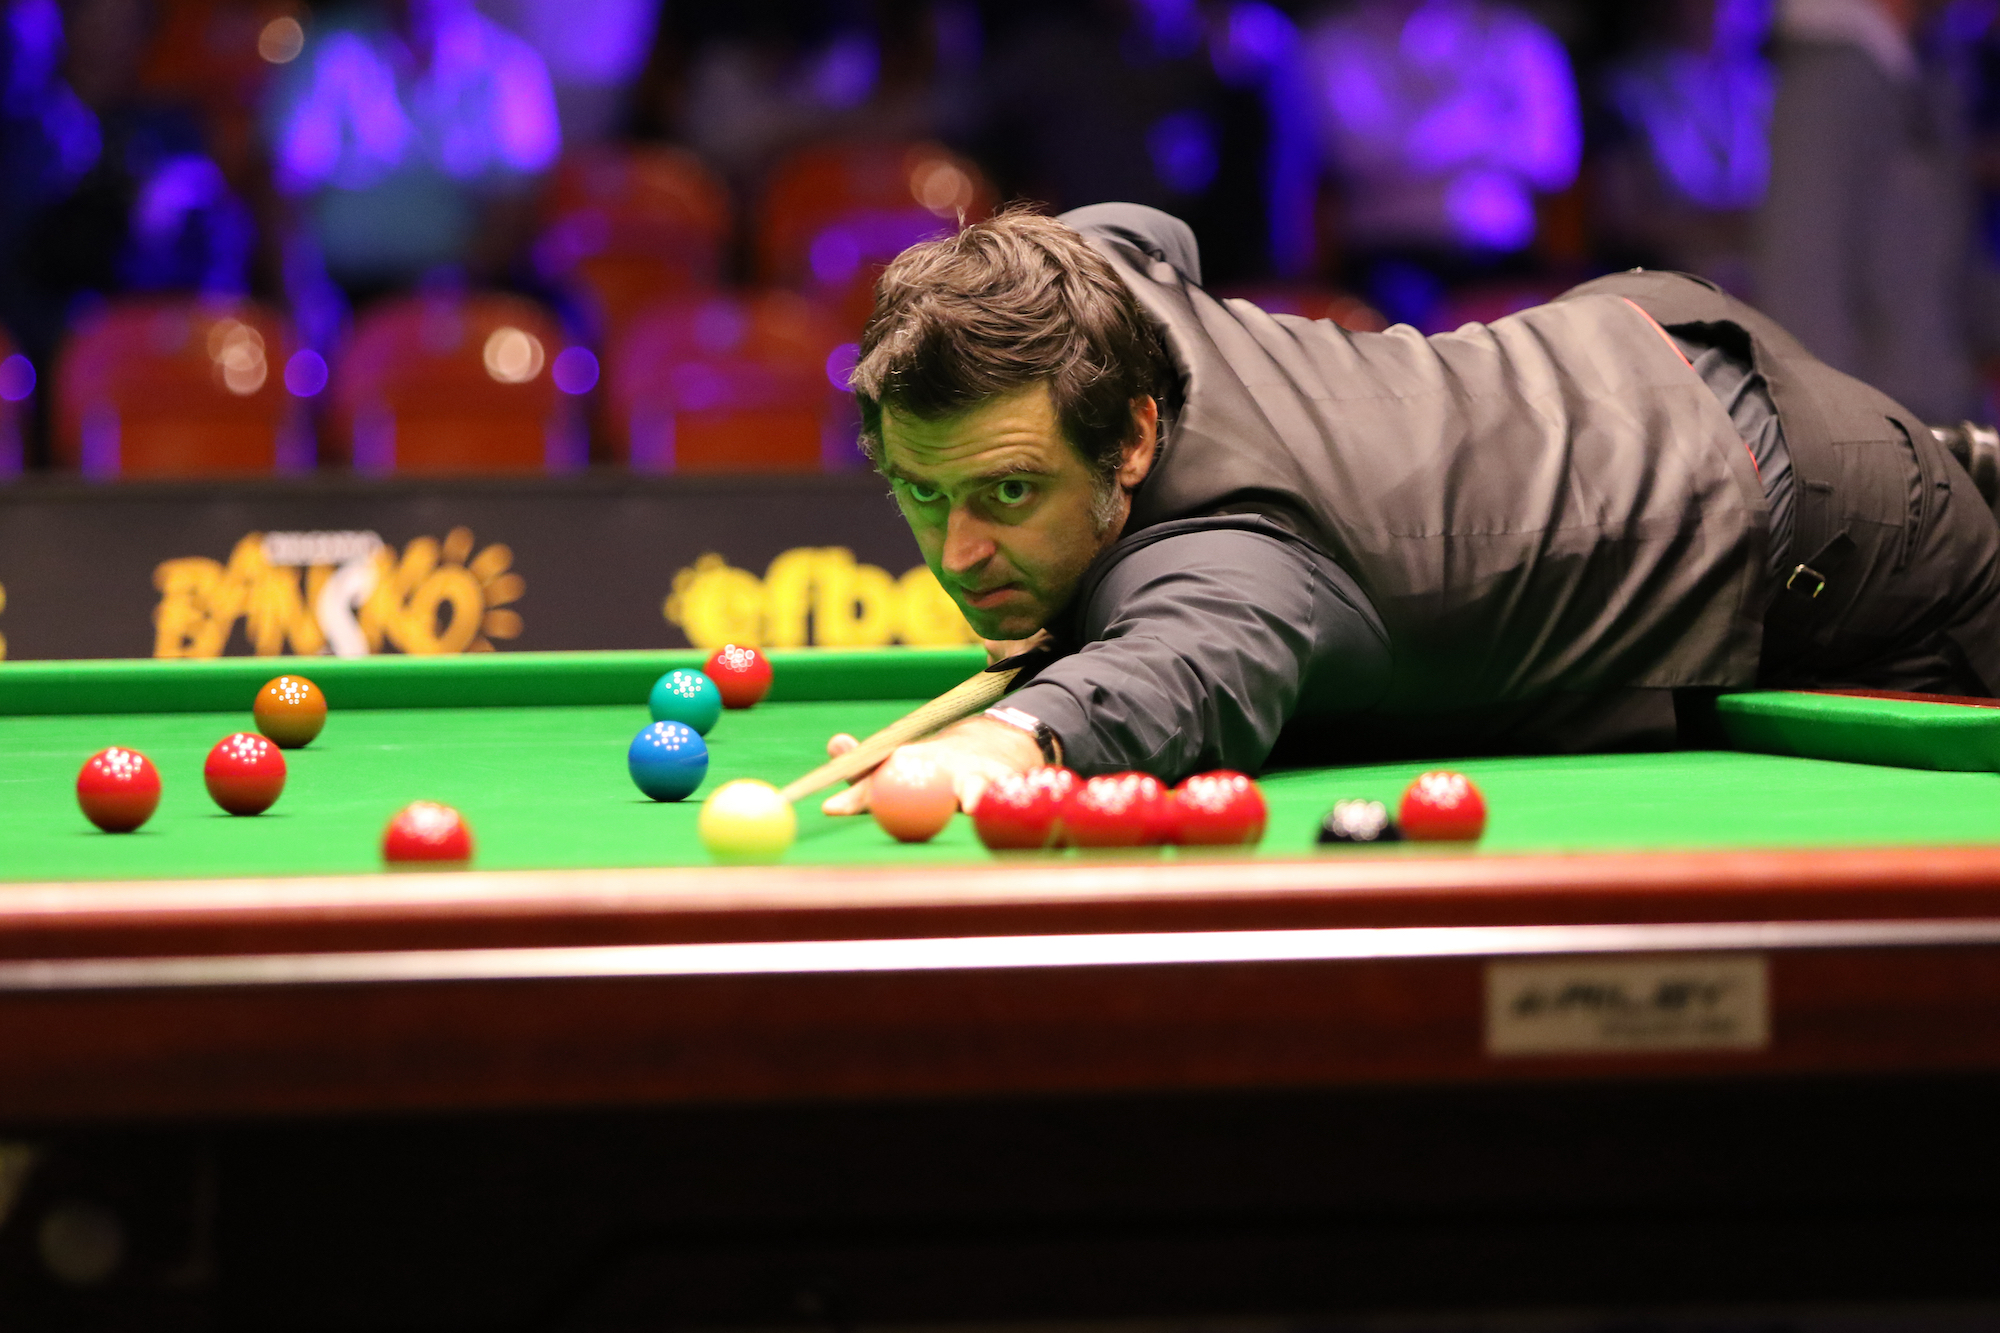 Snooker icon Ronnie O’Sullivan will feature at the 2023 Macau Snooker Masters